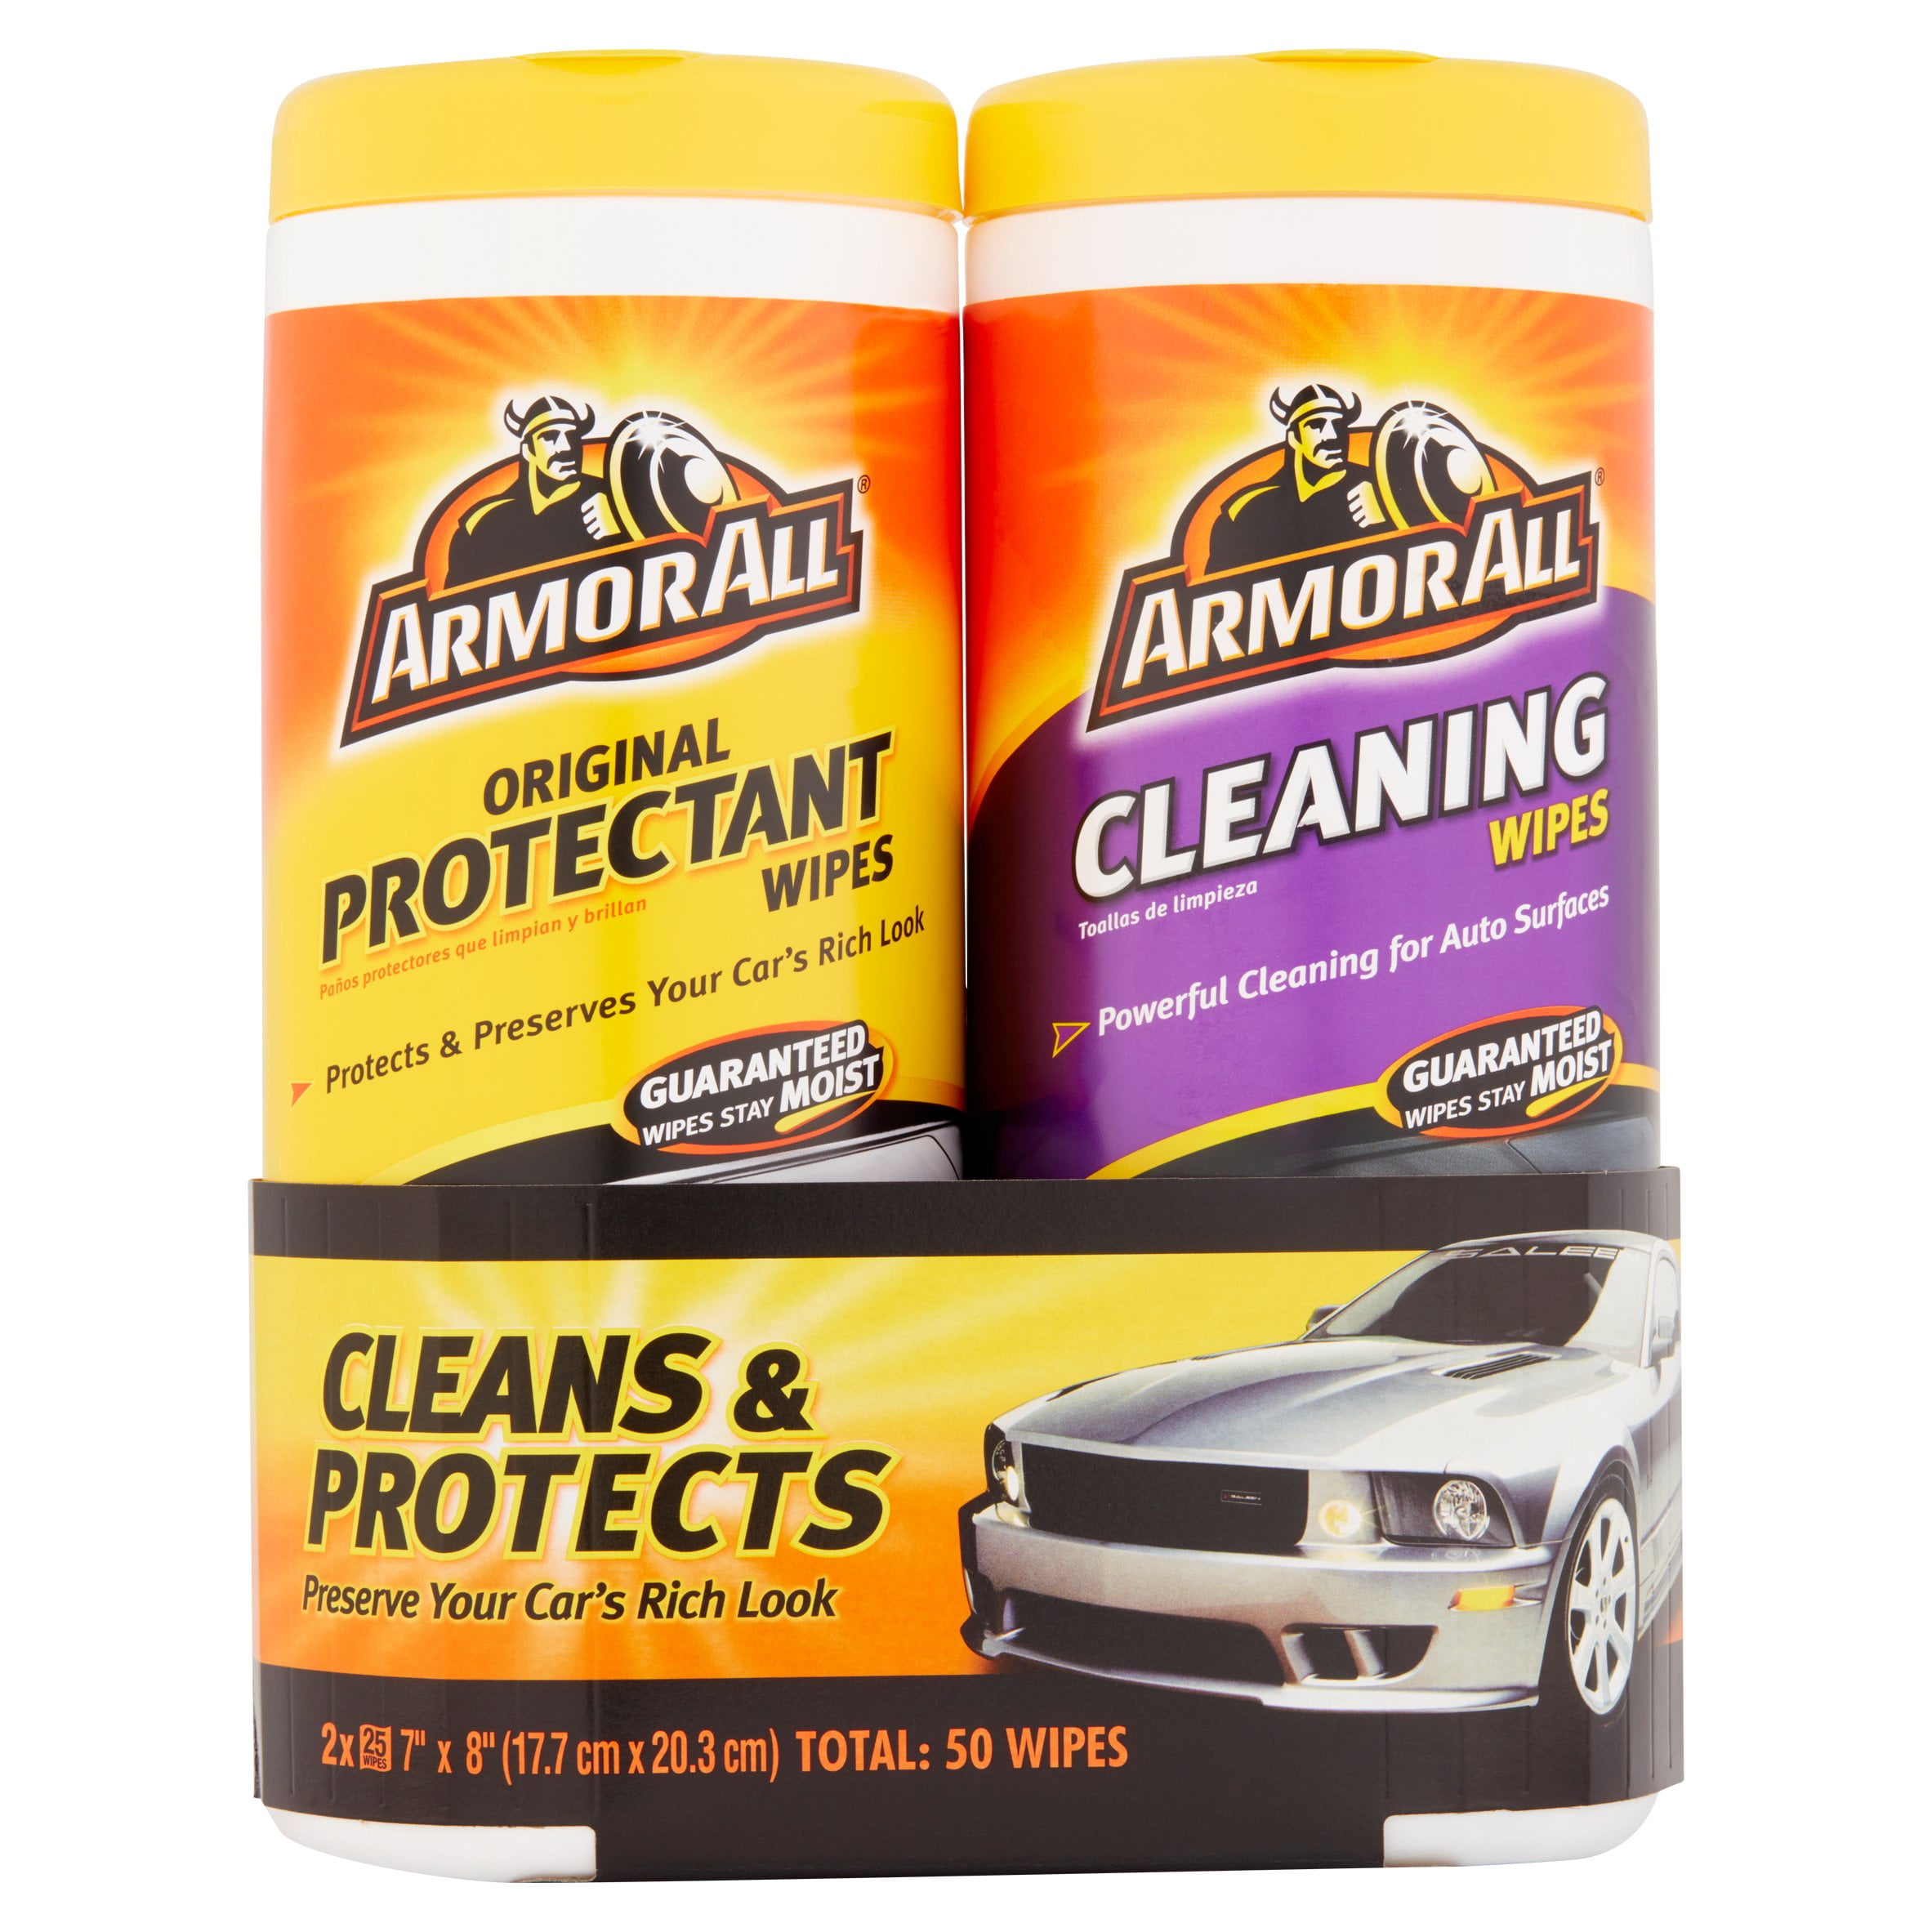 Armor All Protectant Wipes, Original - 25 wipes